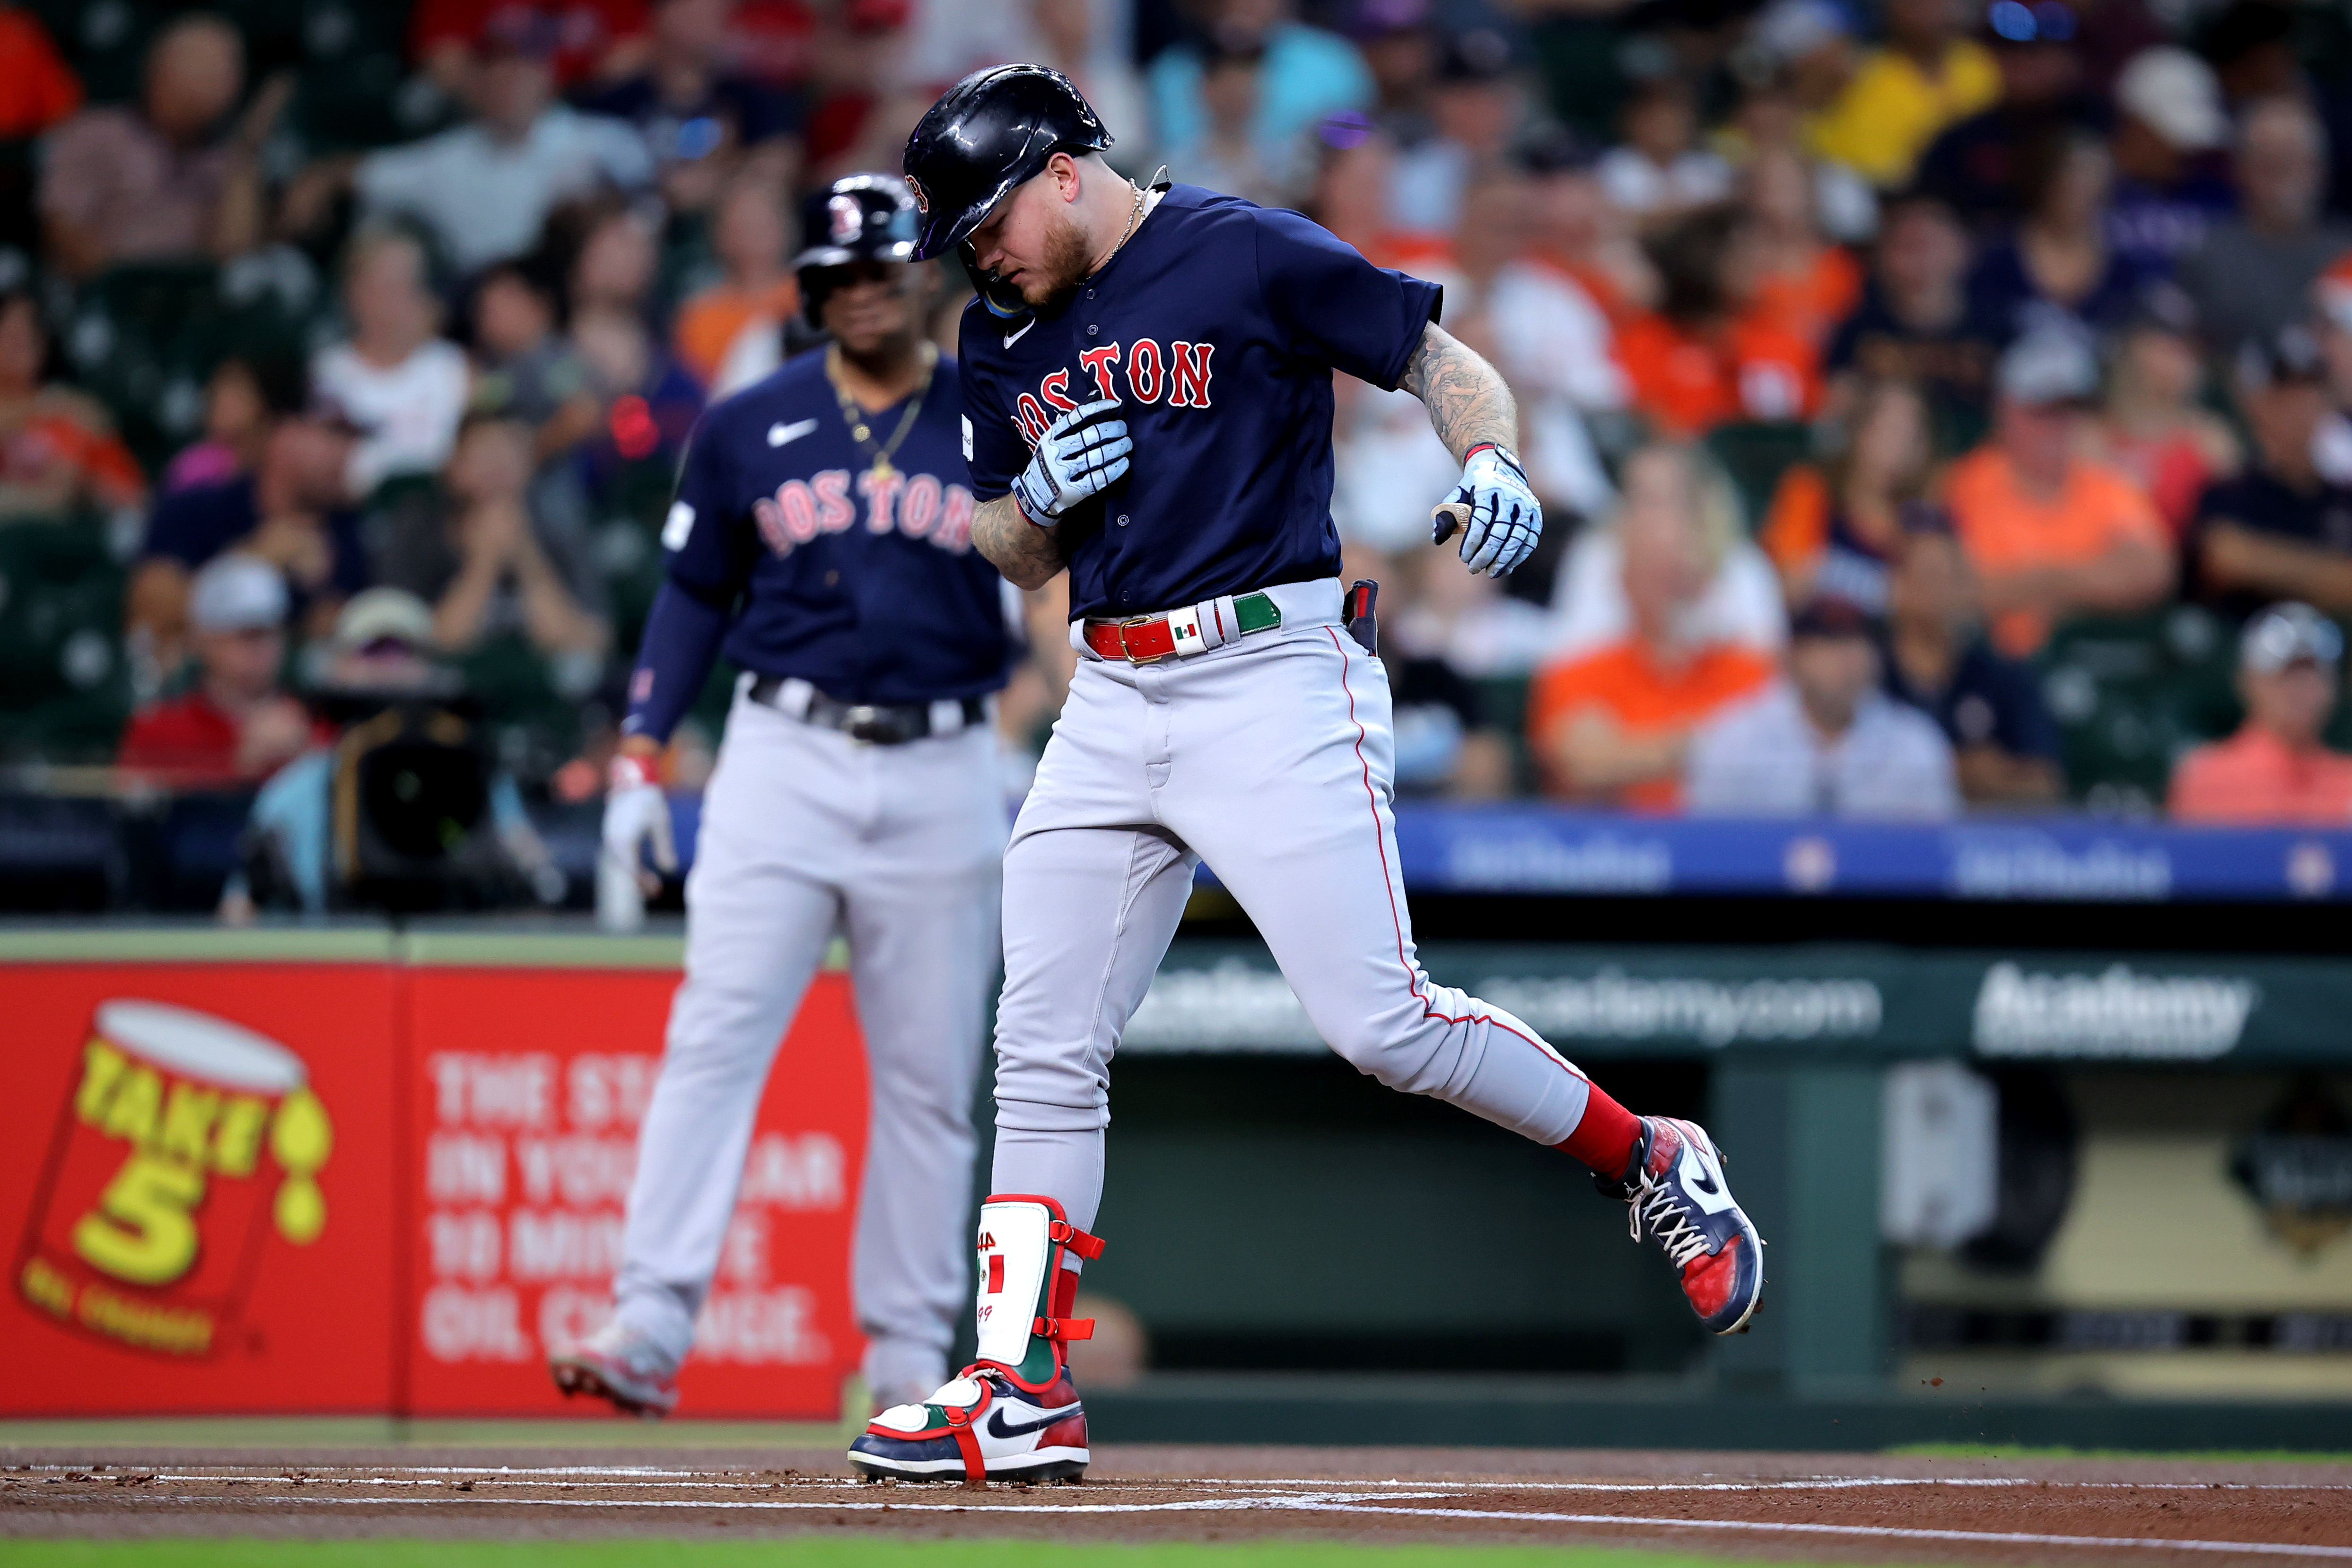 Red Sox earn series split by trouncing Astros, 17-1